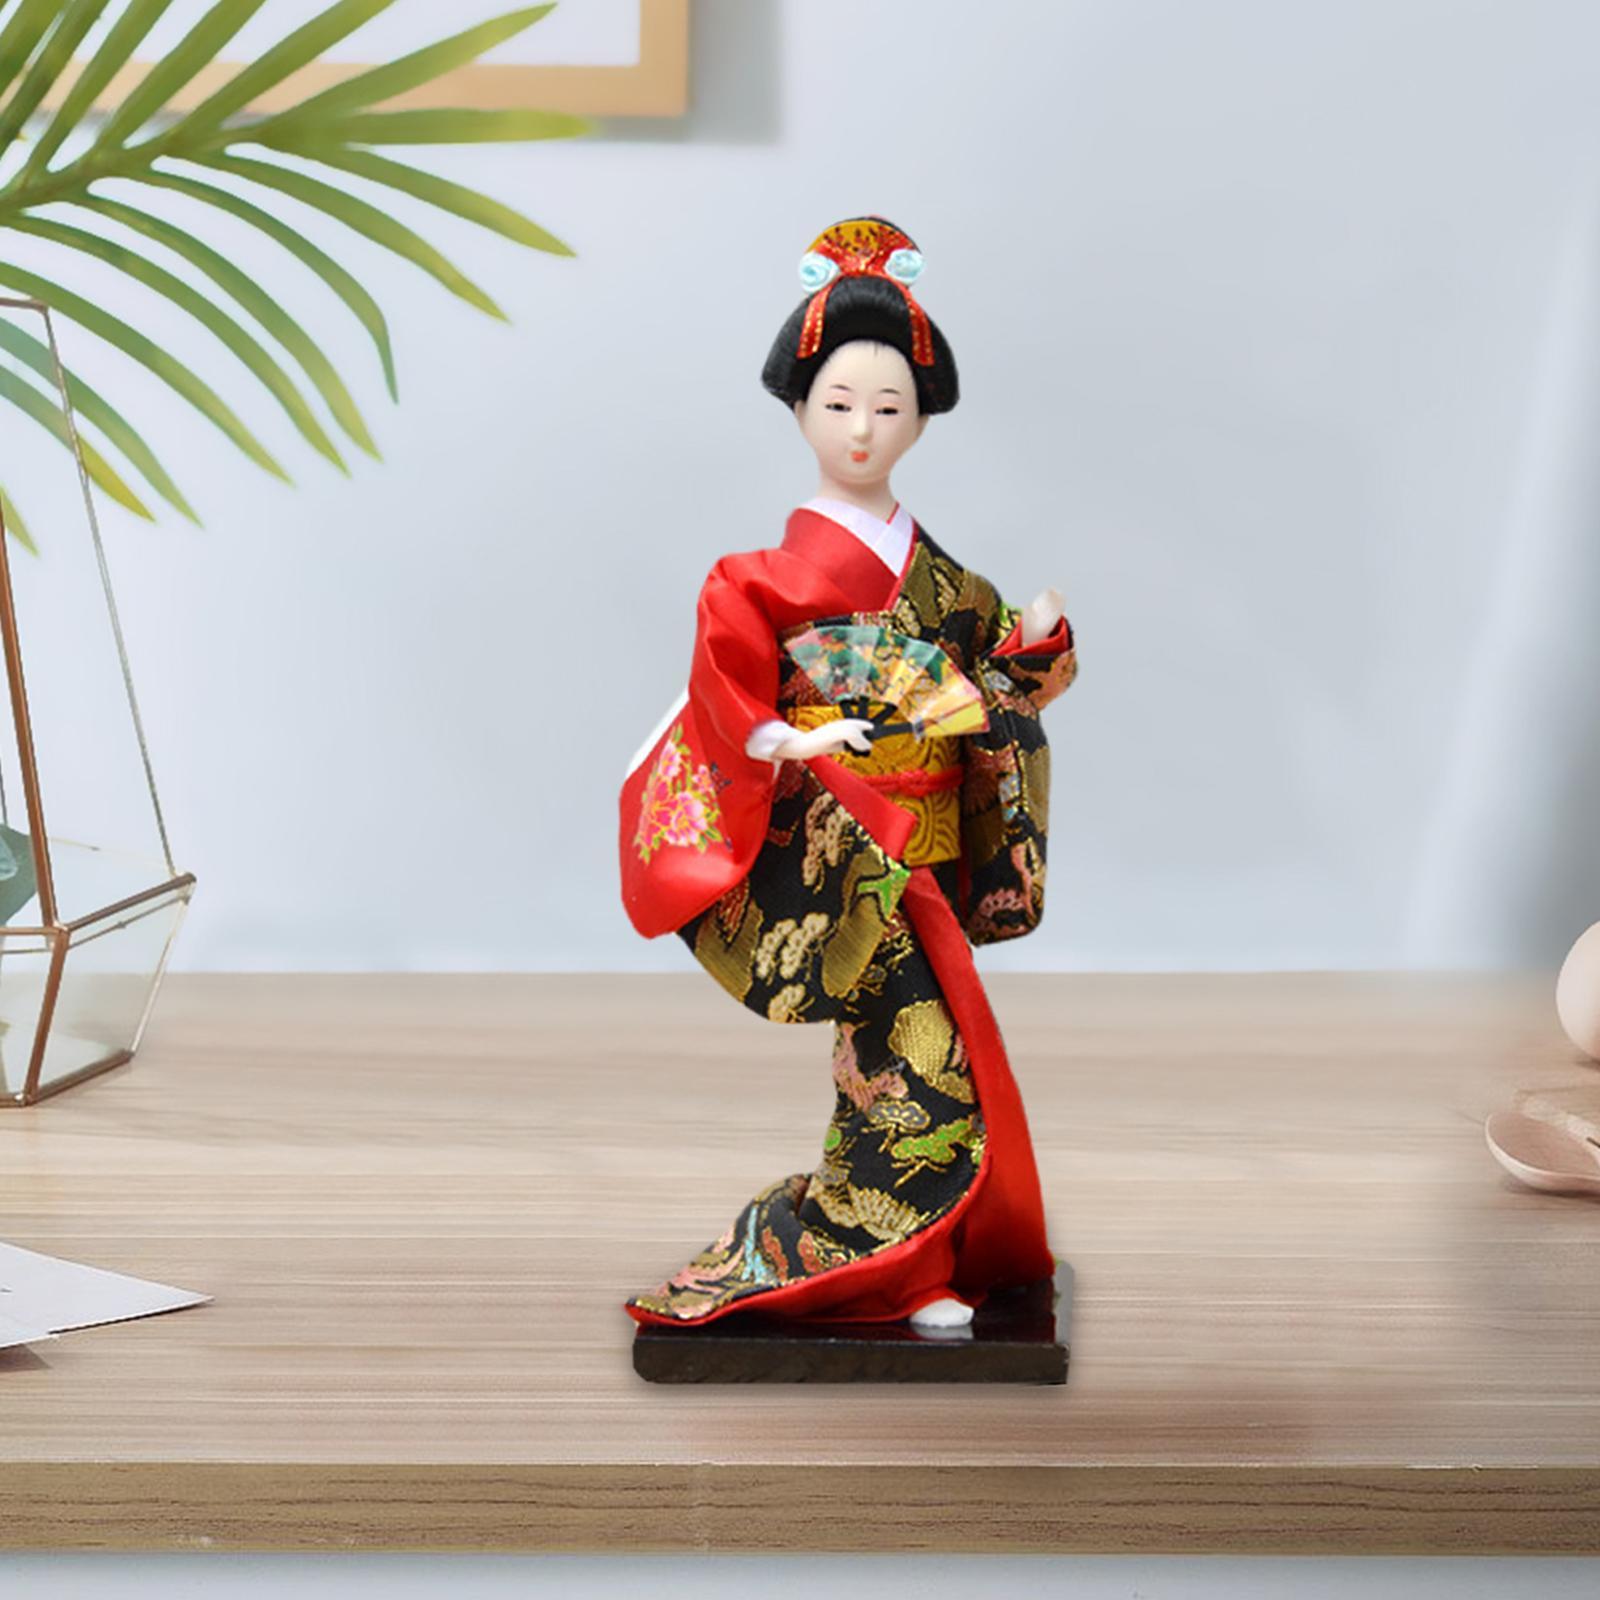 Japanese    Figurine Asian   Ornament Red